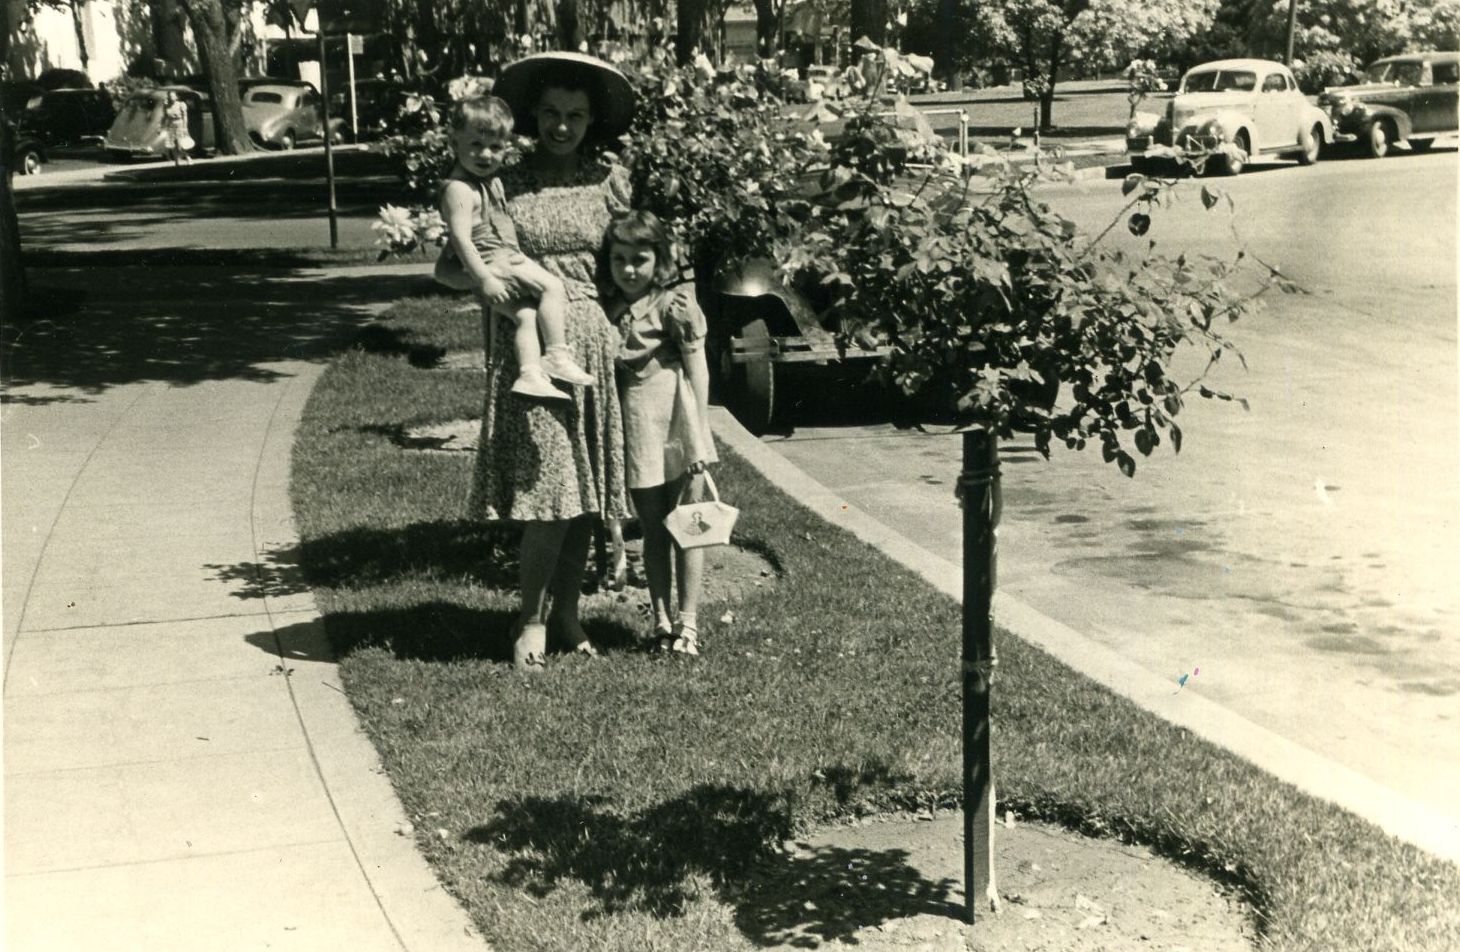 I bought this late 1930s or wartime 1940s snapshot in an antique store because I liked the composition of the photo with its curved curb and sidewalk, and all the prewar cars. View full size.